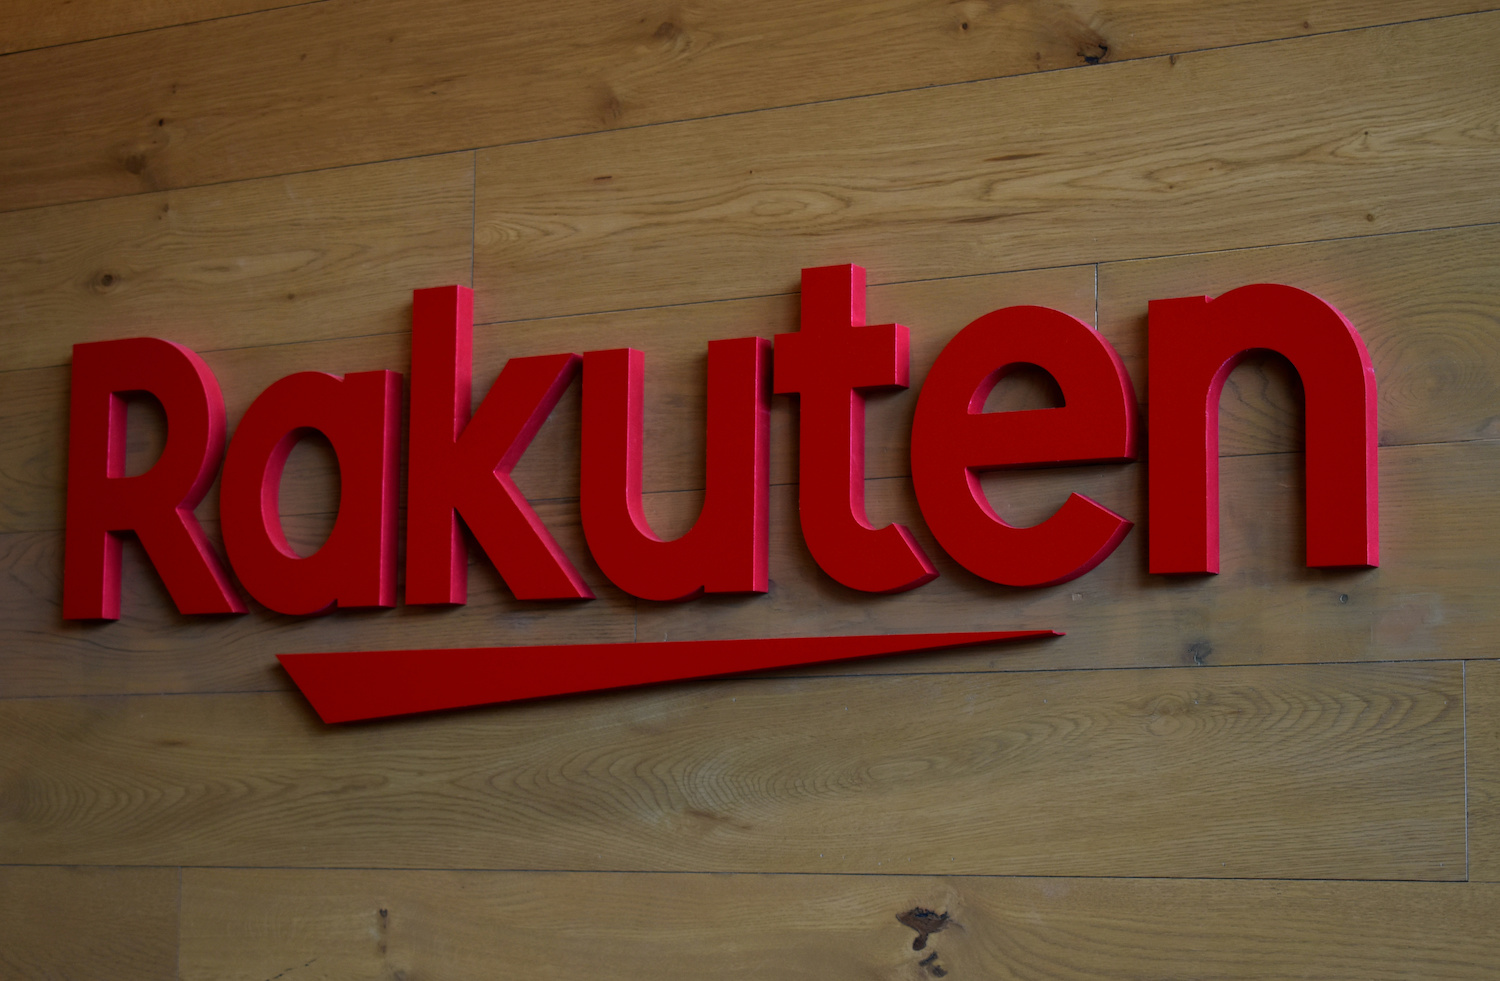 Japan’s Rakuten To Cash In On Banking Unit After Mobile Network Hit